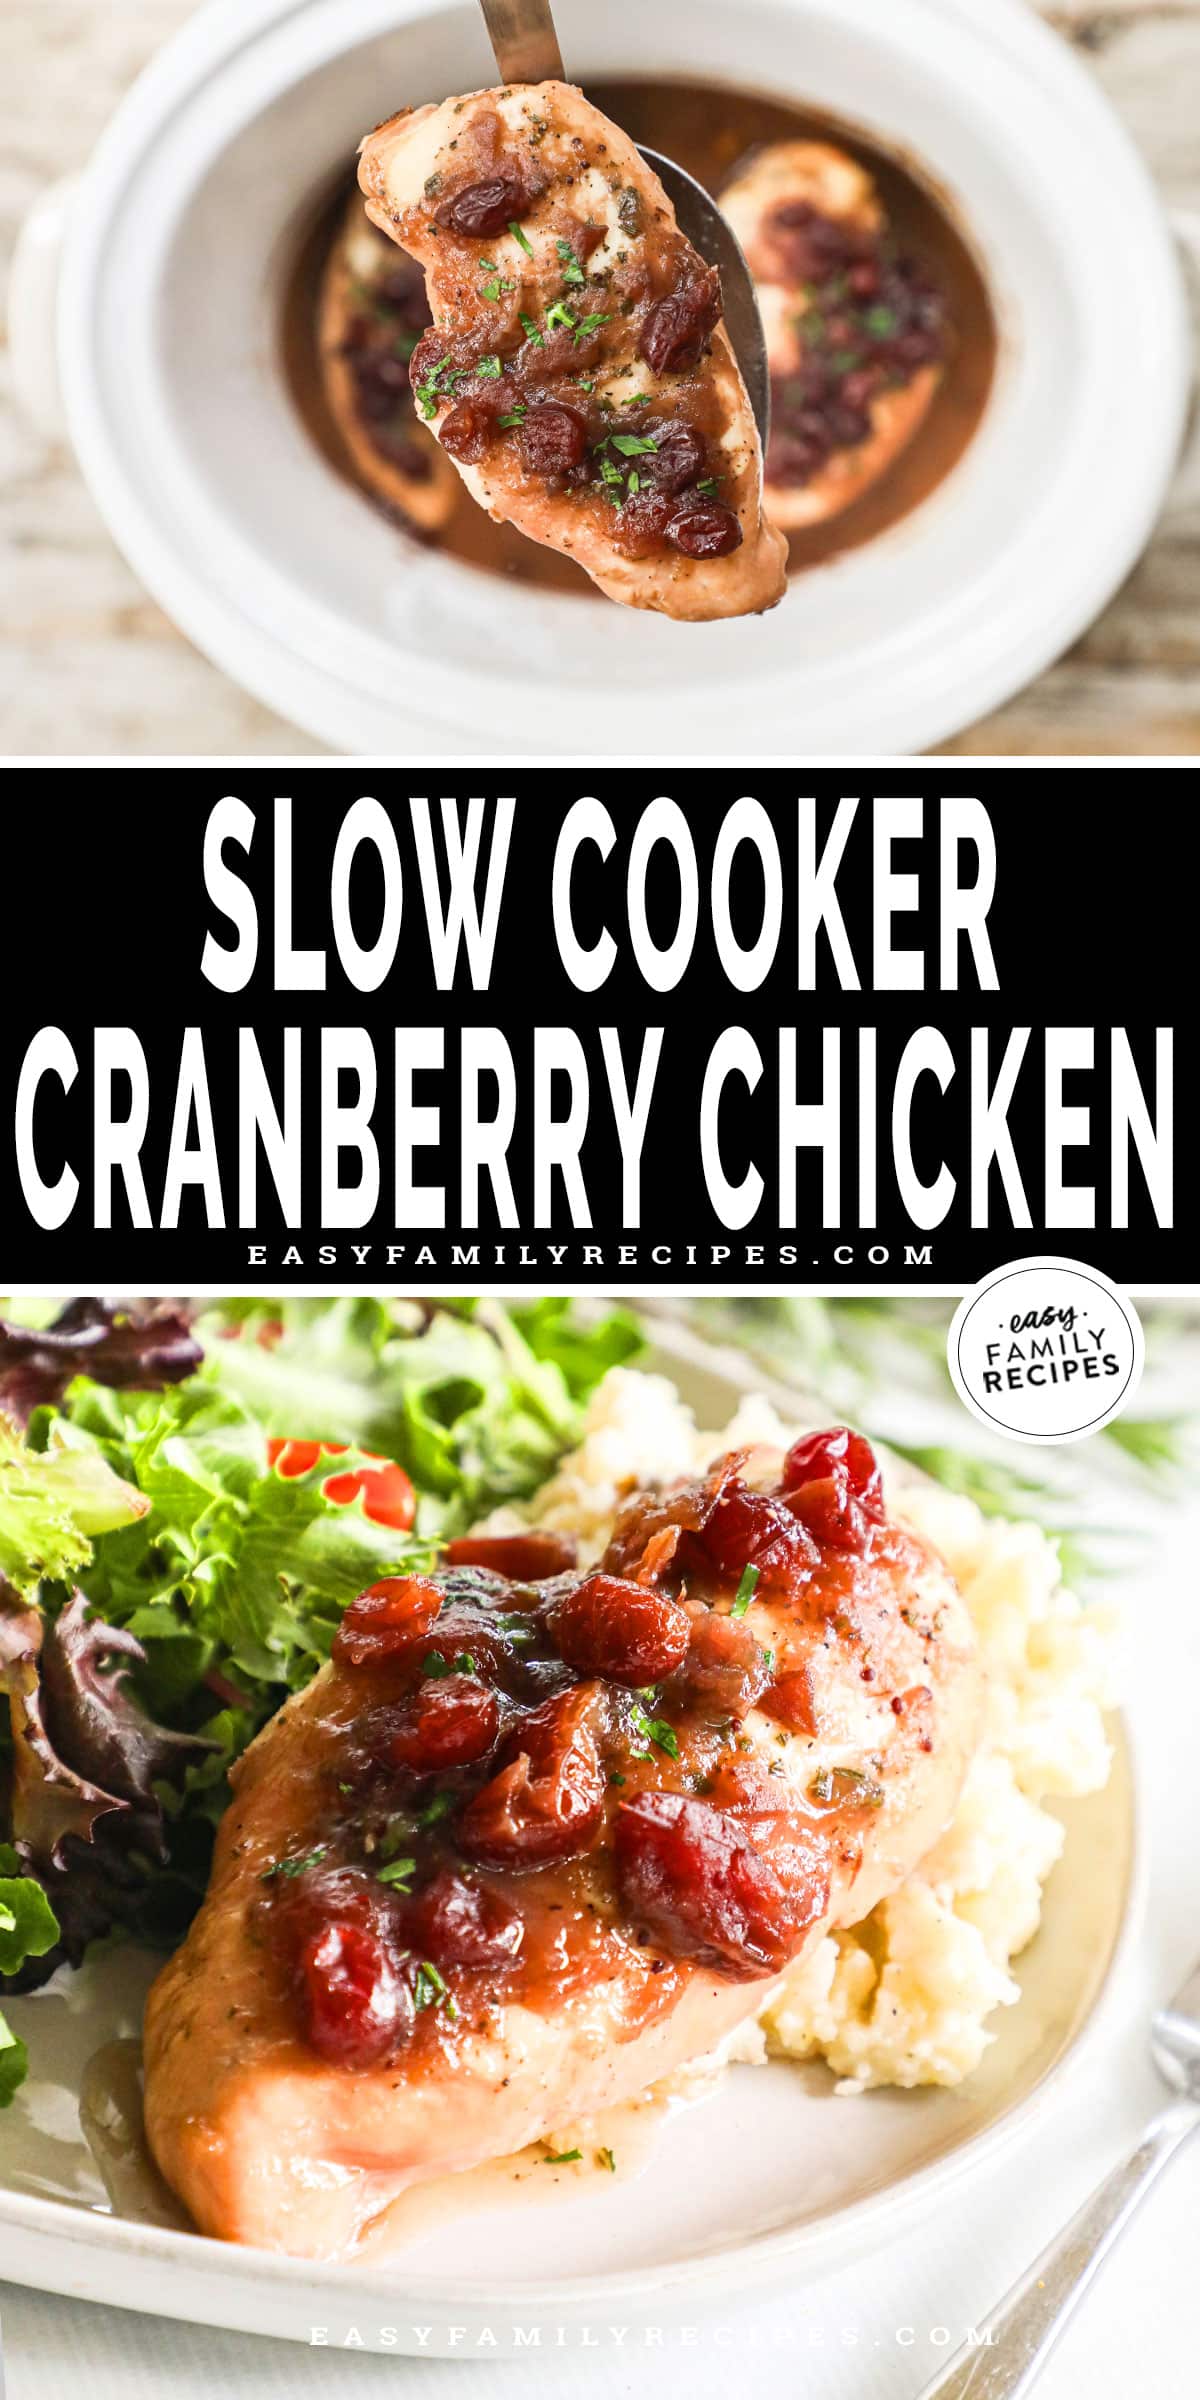 Slow Cooker Cranberry Chicken collage. Top image showing a cooked chicken breast with cranberry sauce being lifted from slow cook and the bottom with the chicken plated with mashed potatoes and salad.